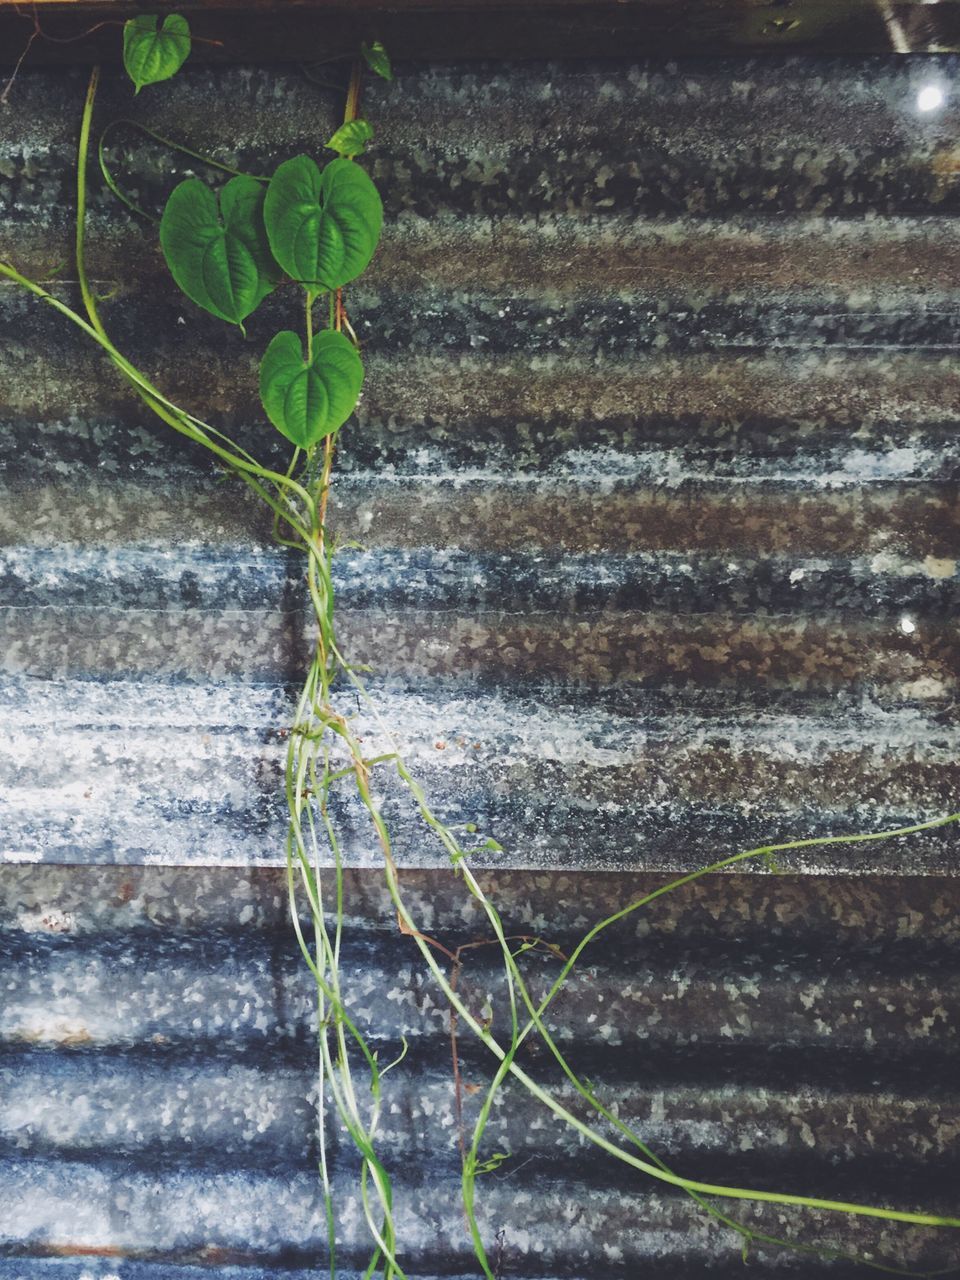 plant, leaf, growth, green color, close-up, nature, growing, outdoors, day, high angle view, no people, fragility, wood - material, sunlight, focus on foreground, freshness, selective focus, stem, wall - building feature, potted plant